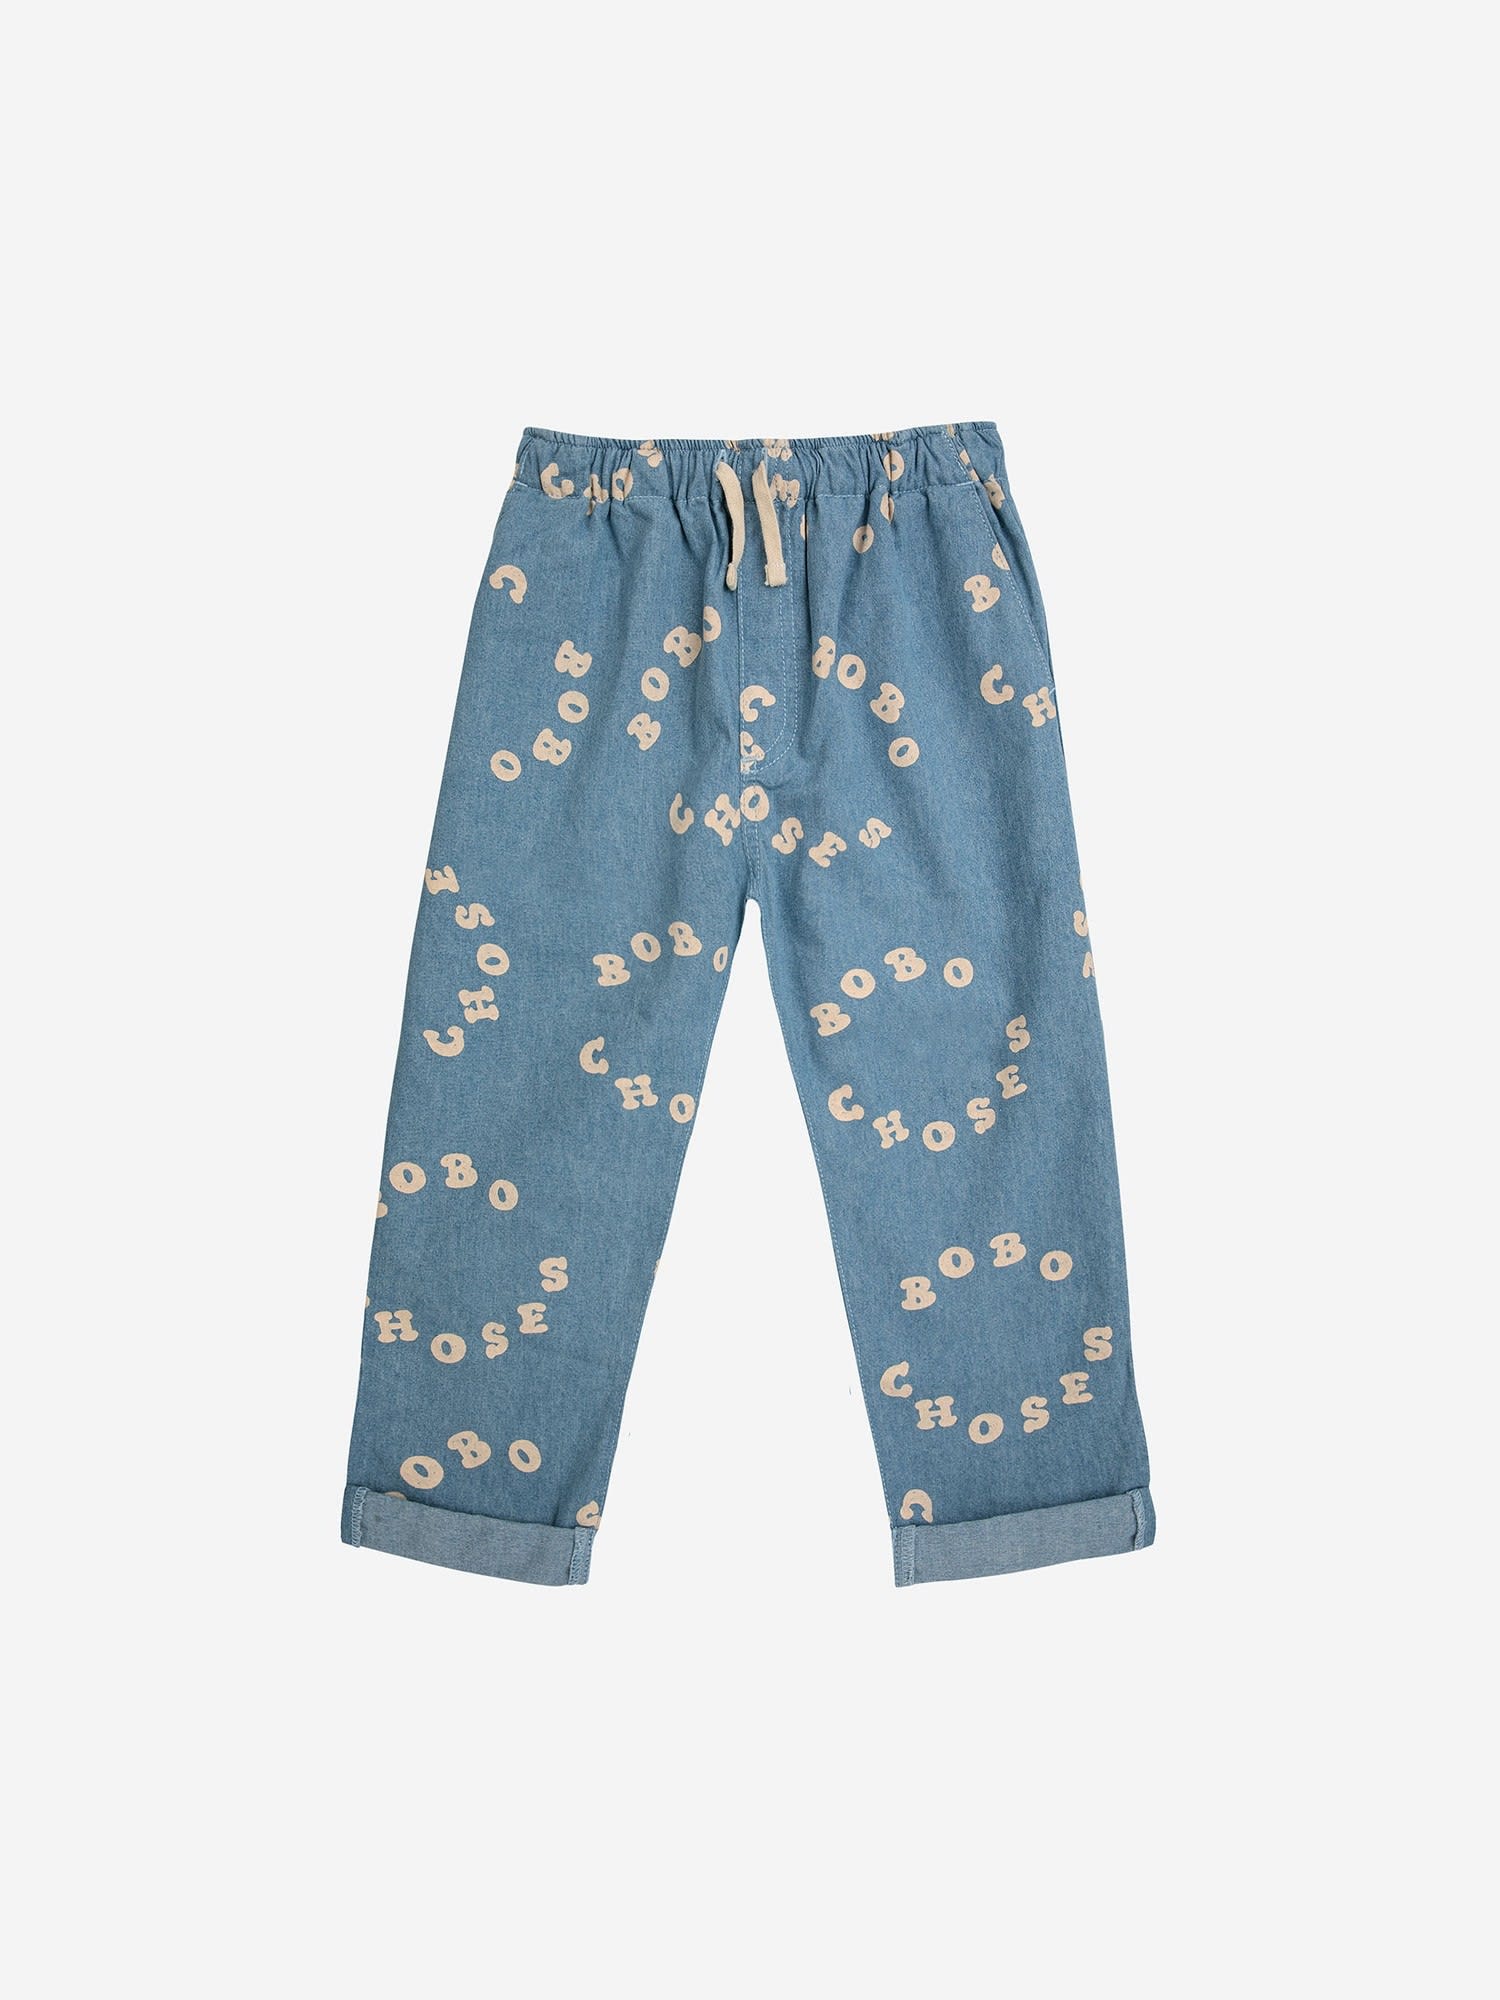 BOBO CHOSES DENIM JEANS FOR KIDS WITH ALL-OVER LOGO